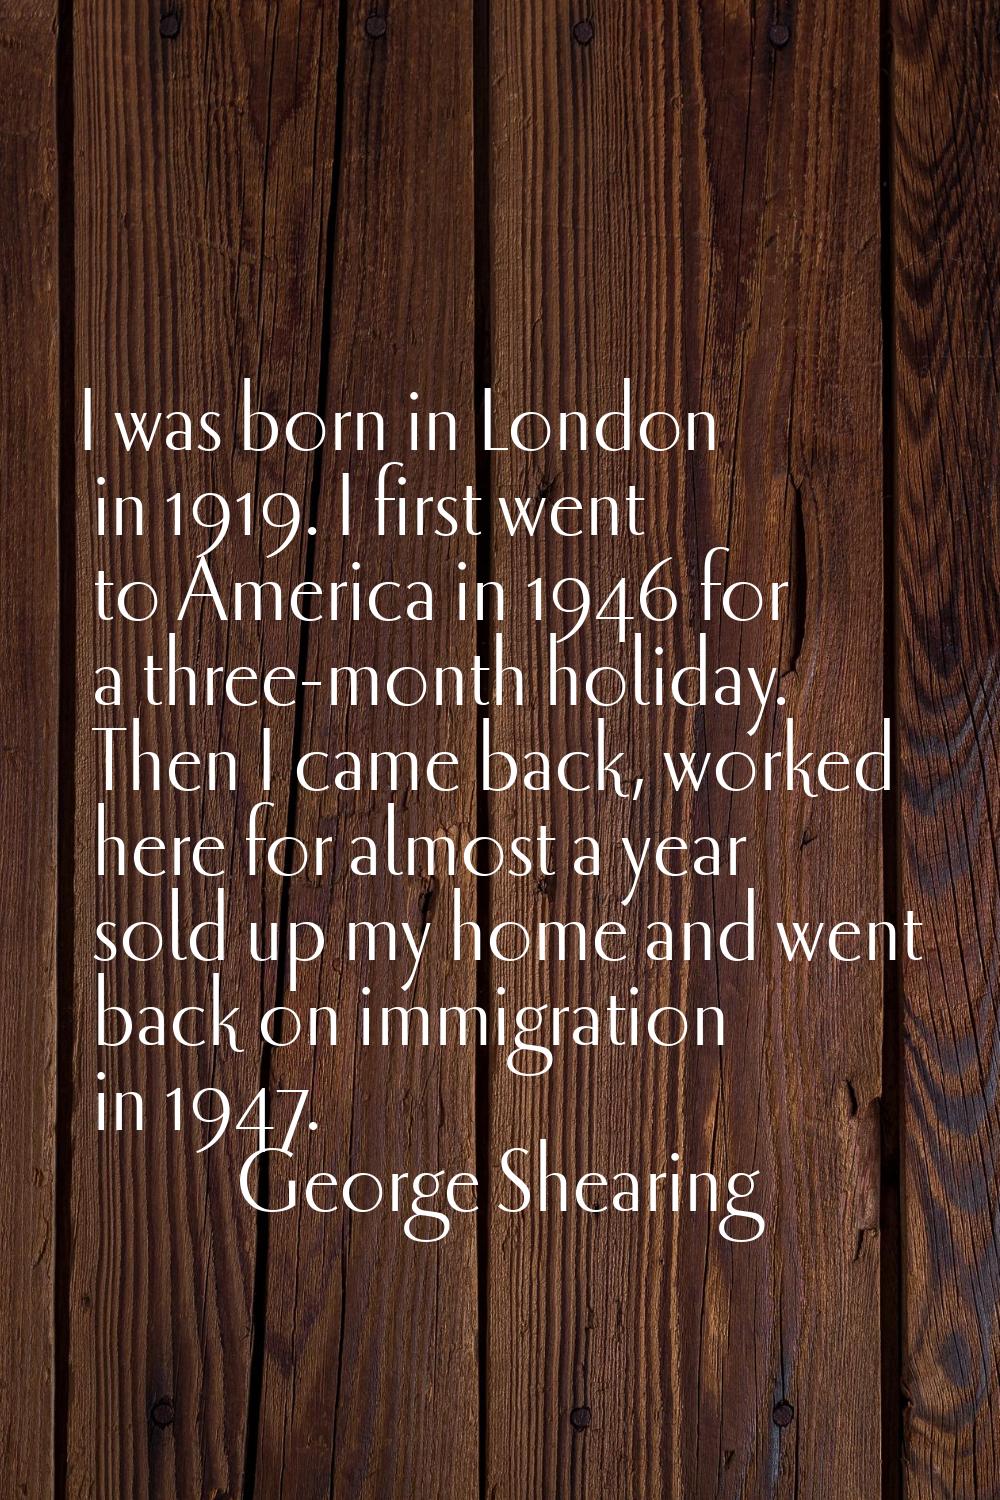 I was born in London in 1919. I first went to America in 1946 for a three-month holiday. Then I cam